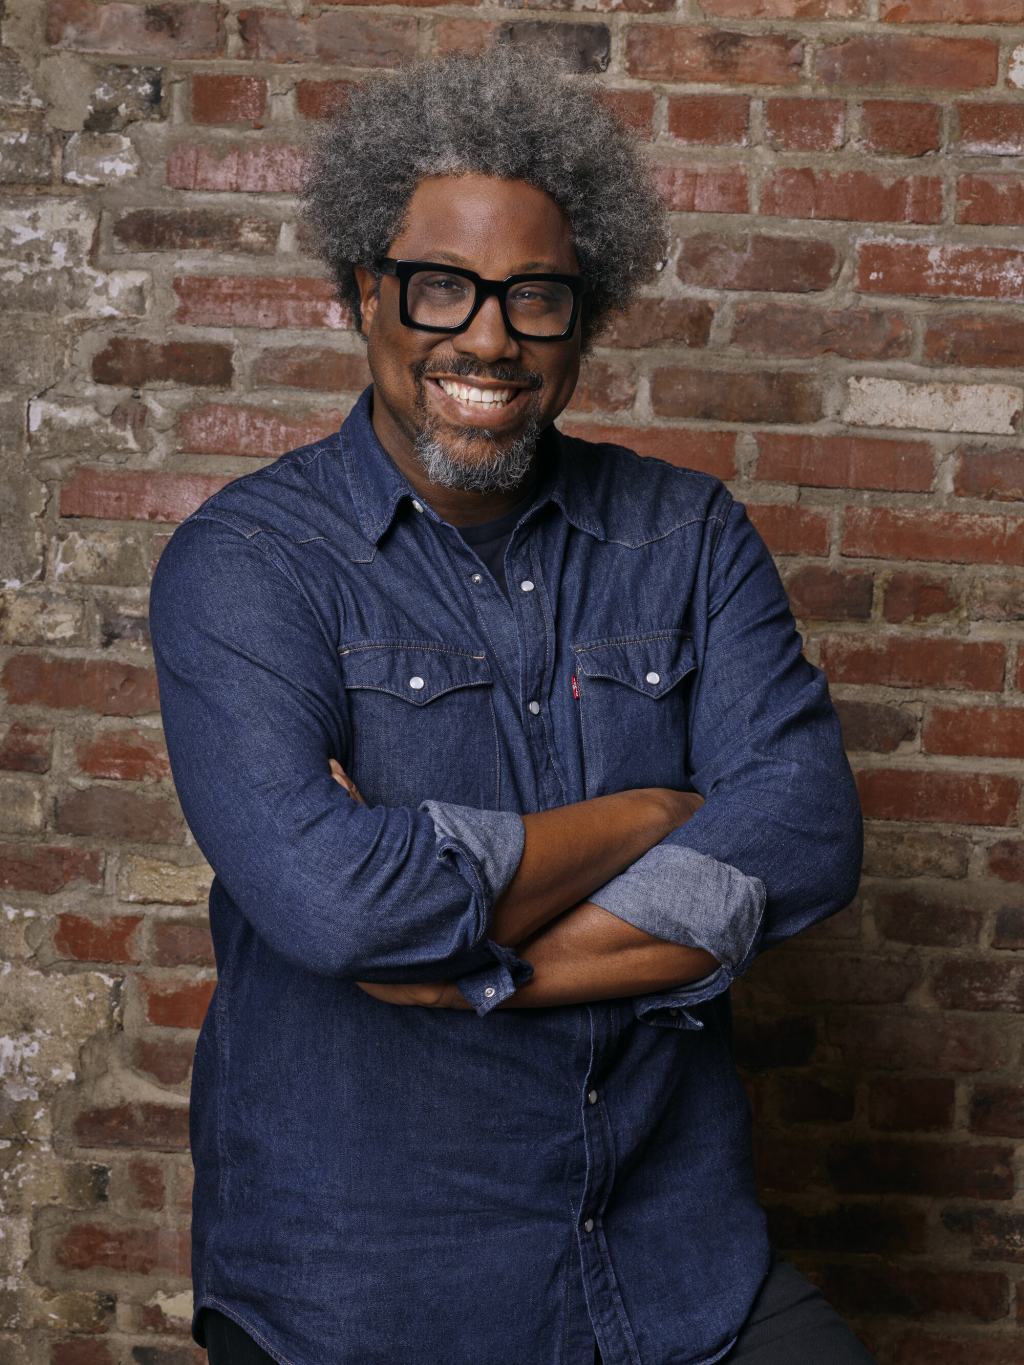 comedian-and-activist-w.-kamau-bell-is-joining-‘what-would-you-do’-and-preparing-for-a-standup tour